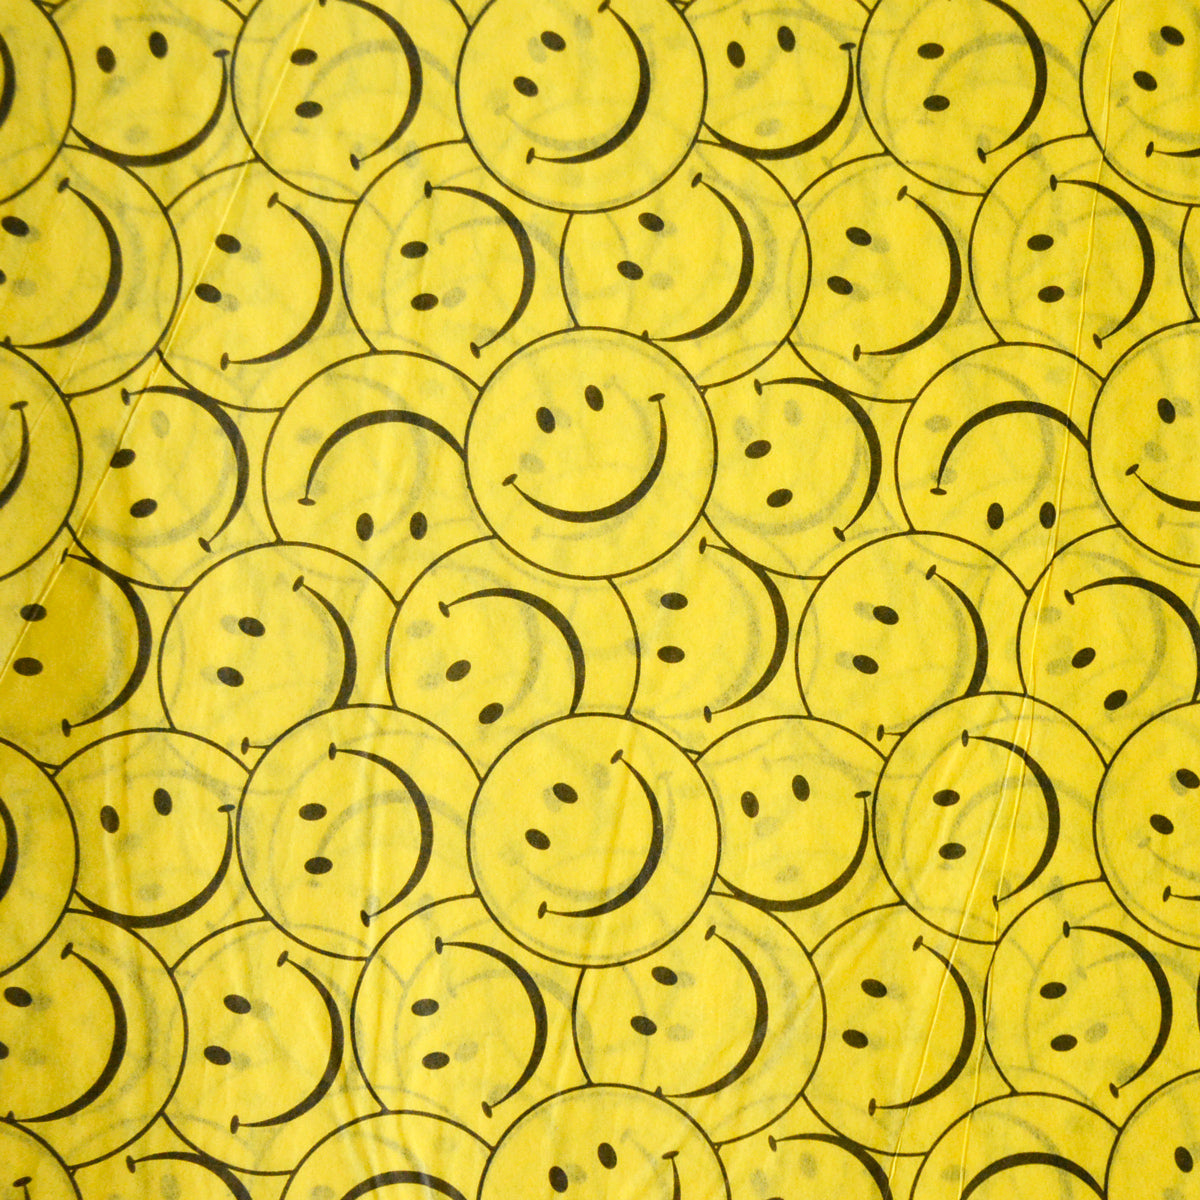 Groovy Smiley Face Tissue Paper - Groovy Themed Gift Wrapping